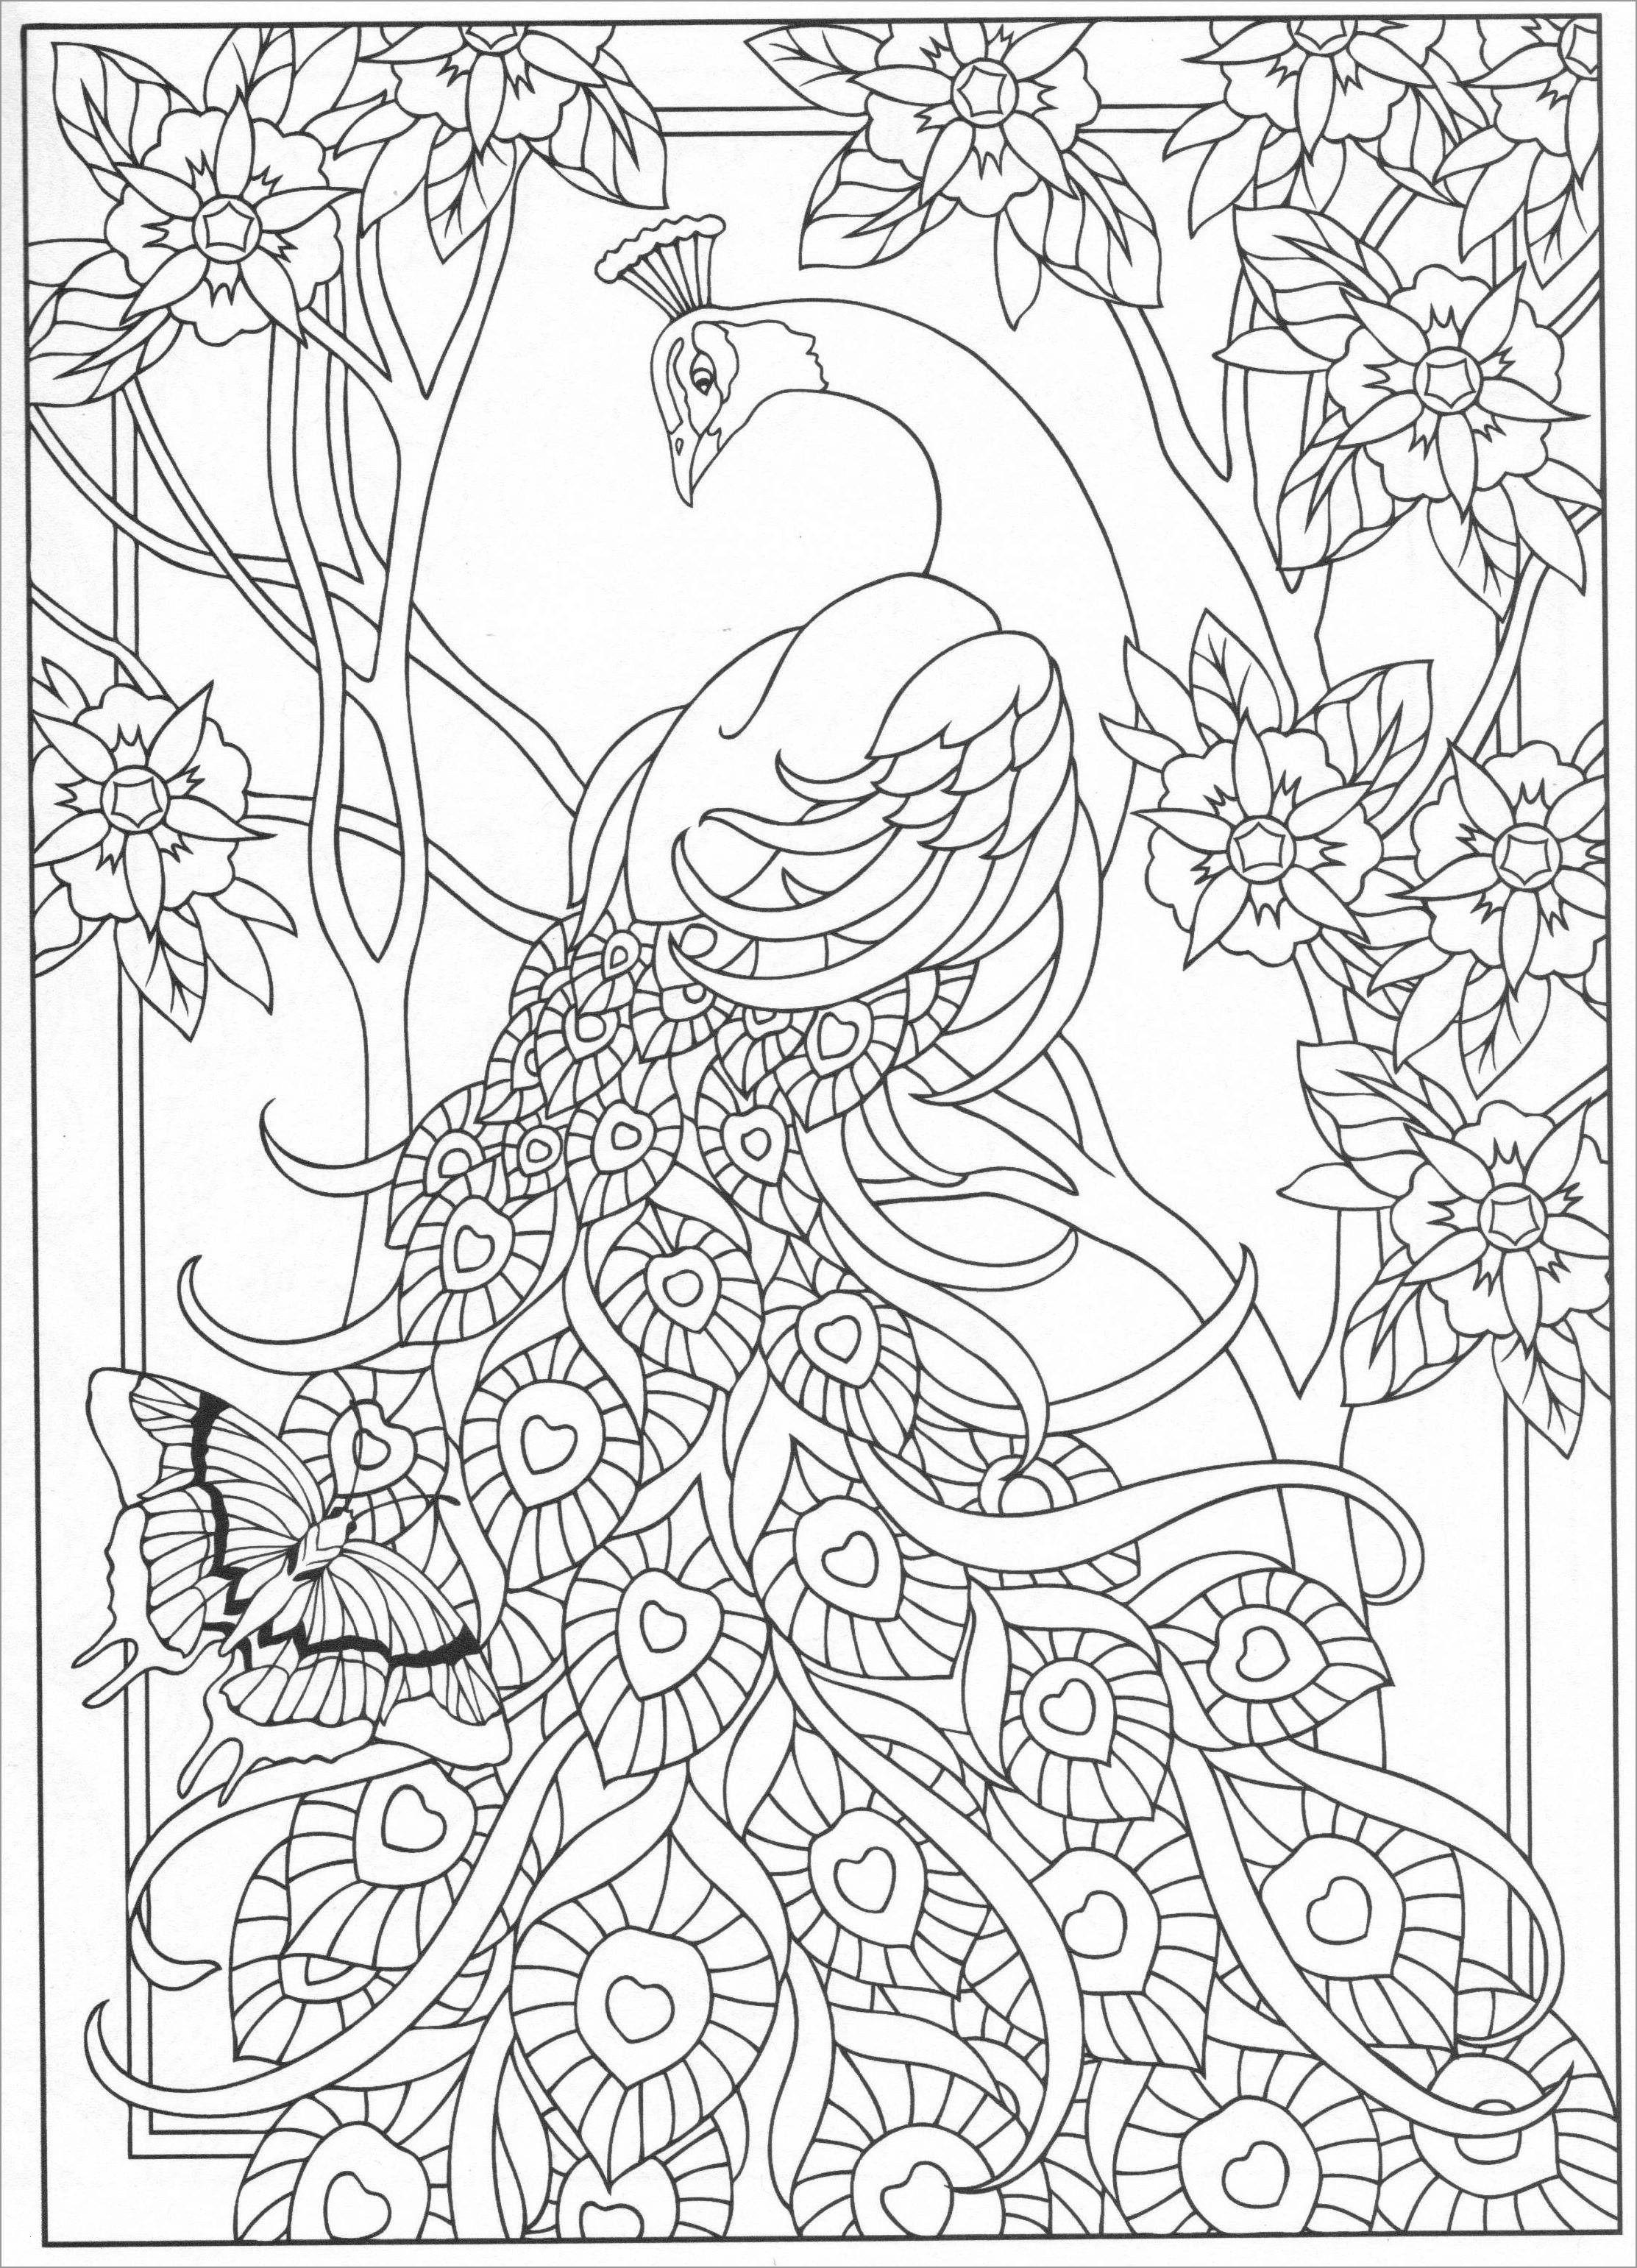 Peacock Coloring Pages - ColoringBay